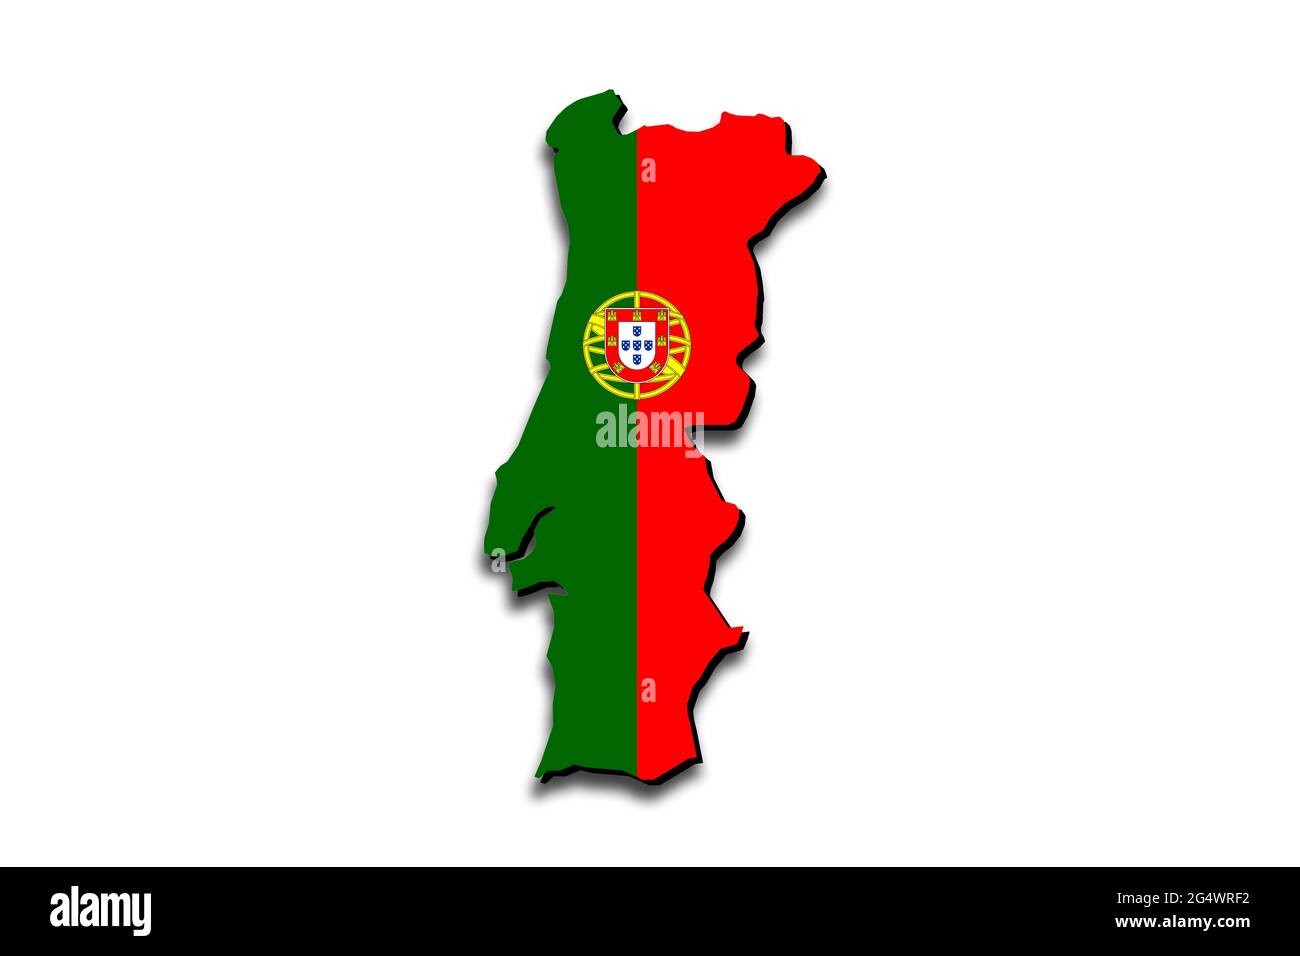 3d Rendering Of A Map Of Europe With Portugal Selected Stock Photo, Picture  and Royalty Free Image. Image 7250777.